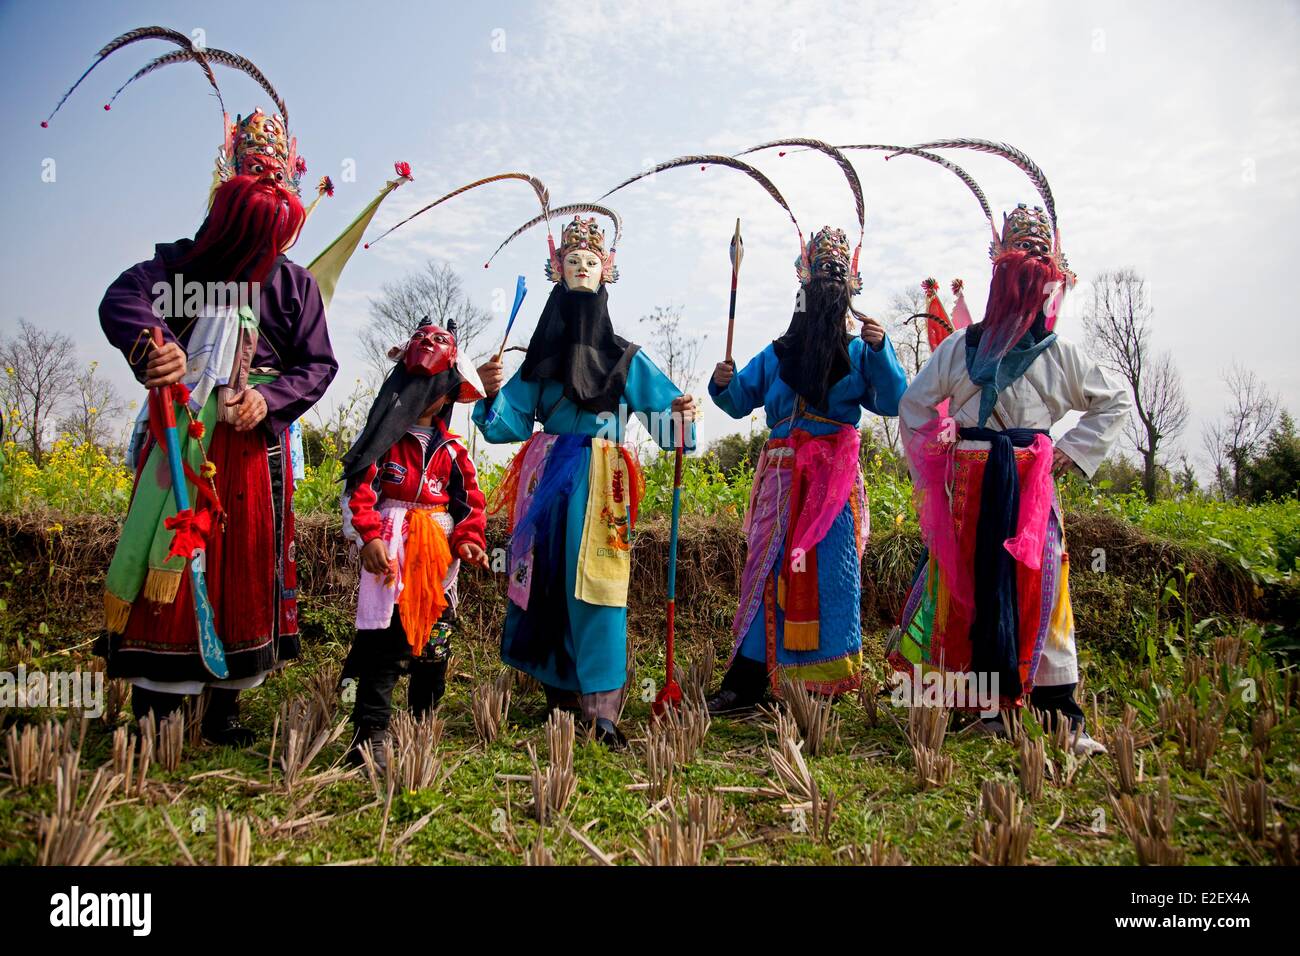 China, Guizhou province, Zhouguan, DiXi, or Ground Opera, the Living fossil of the Opera, in the fields Stock Photo